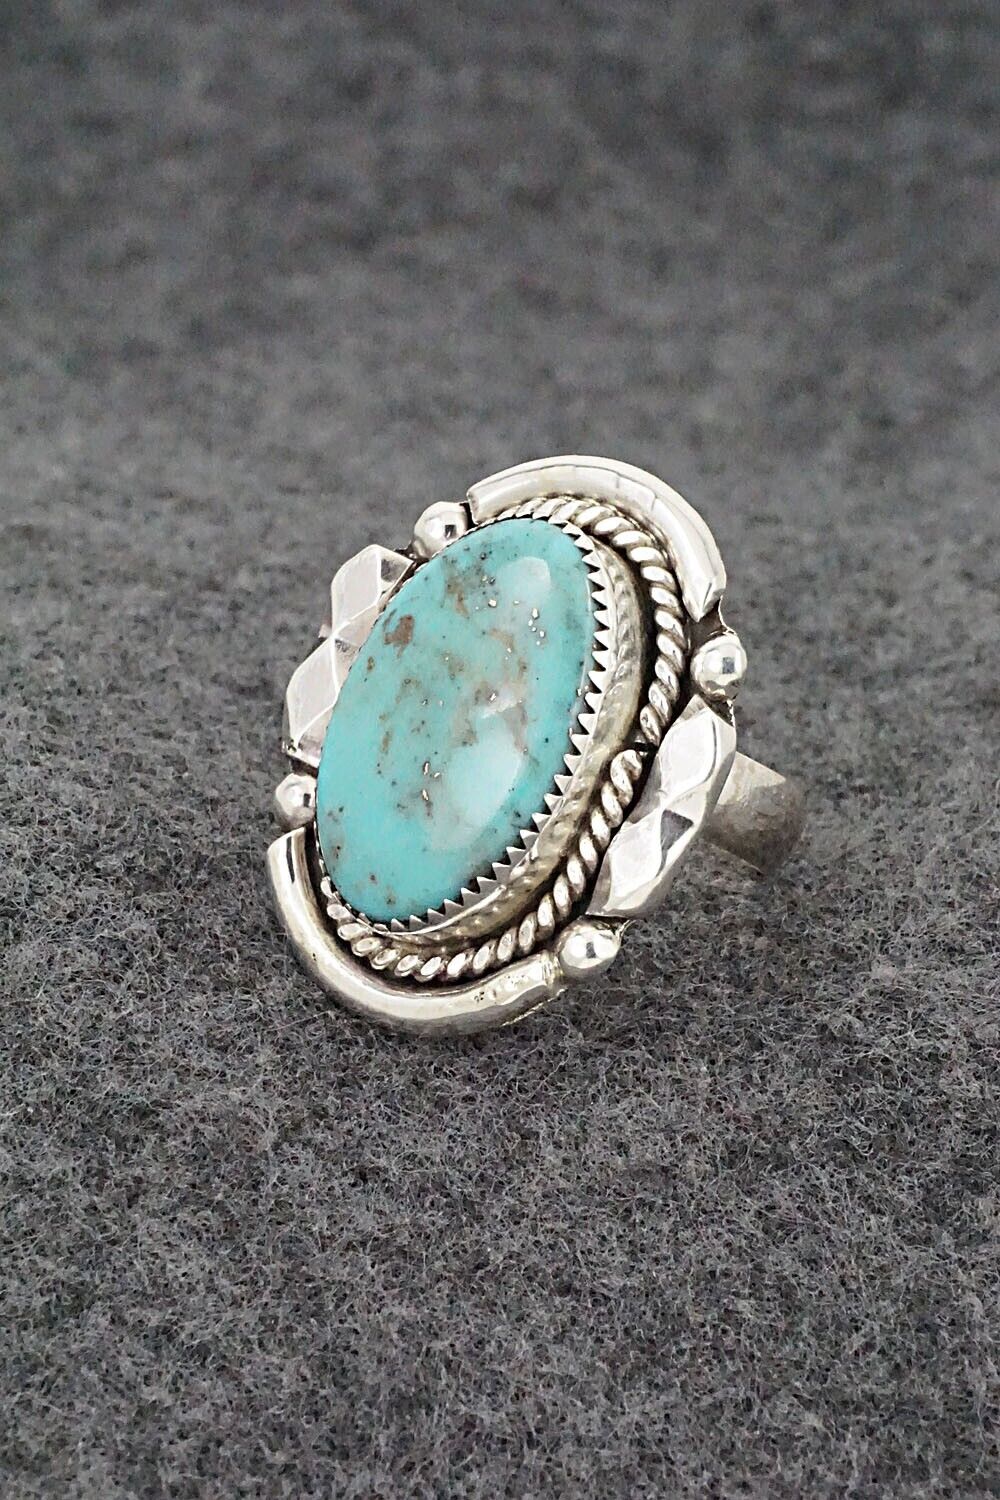 Turquoise & Sterling Silver Ring - Kenny Calavaza - Size 6.75